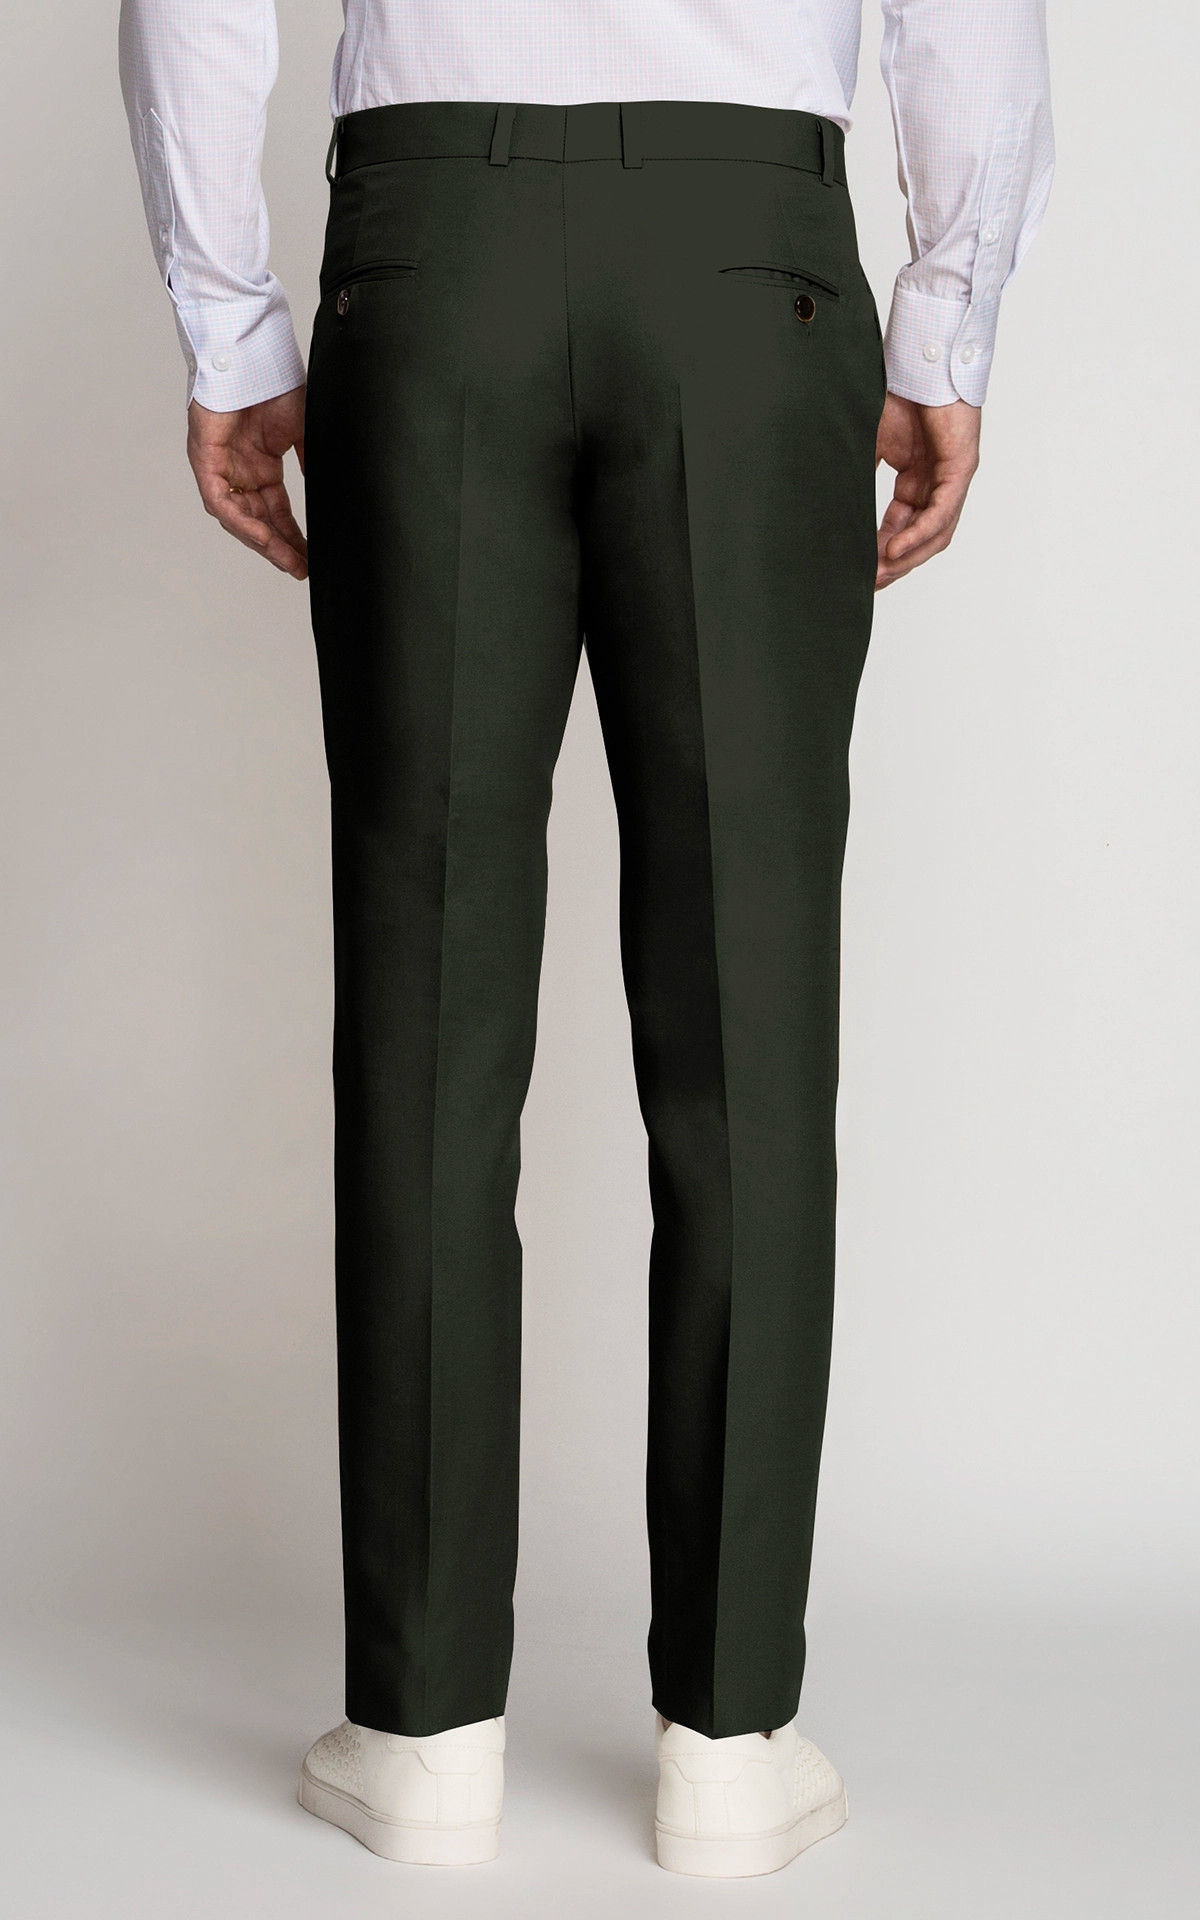 Jeans & Trousers | Pastel Green Formal Trousers | Freeup